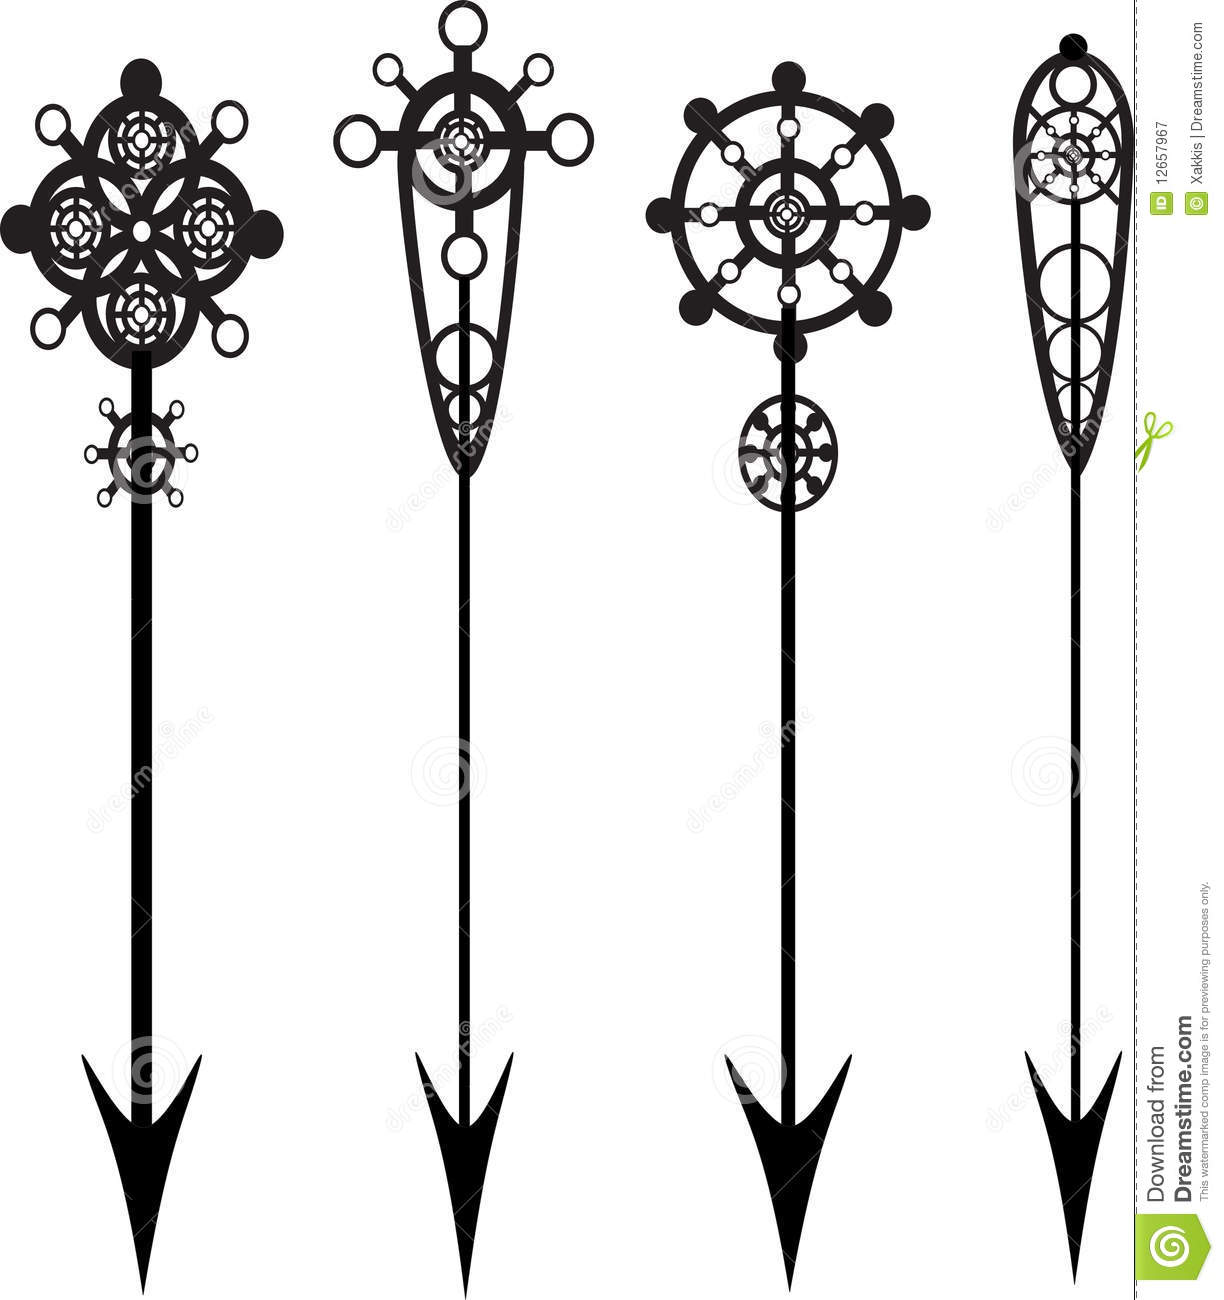 Arrows Vector Set Royalty Free Stock Photography   Image  12657967